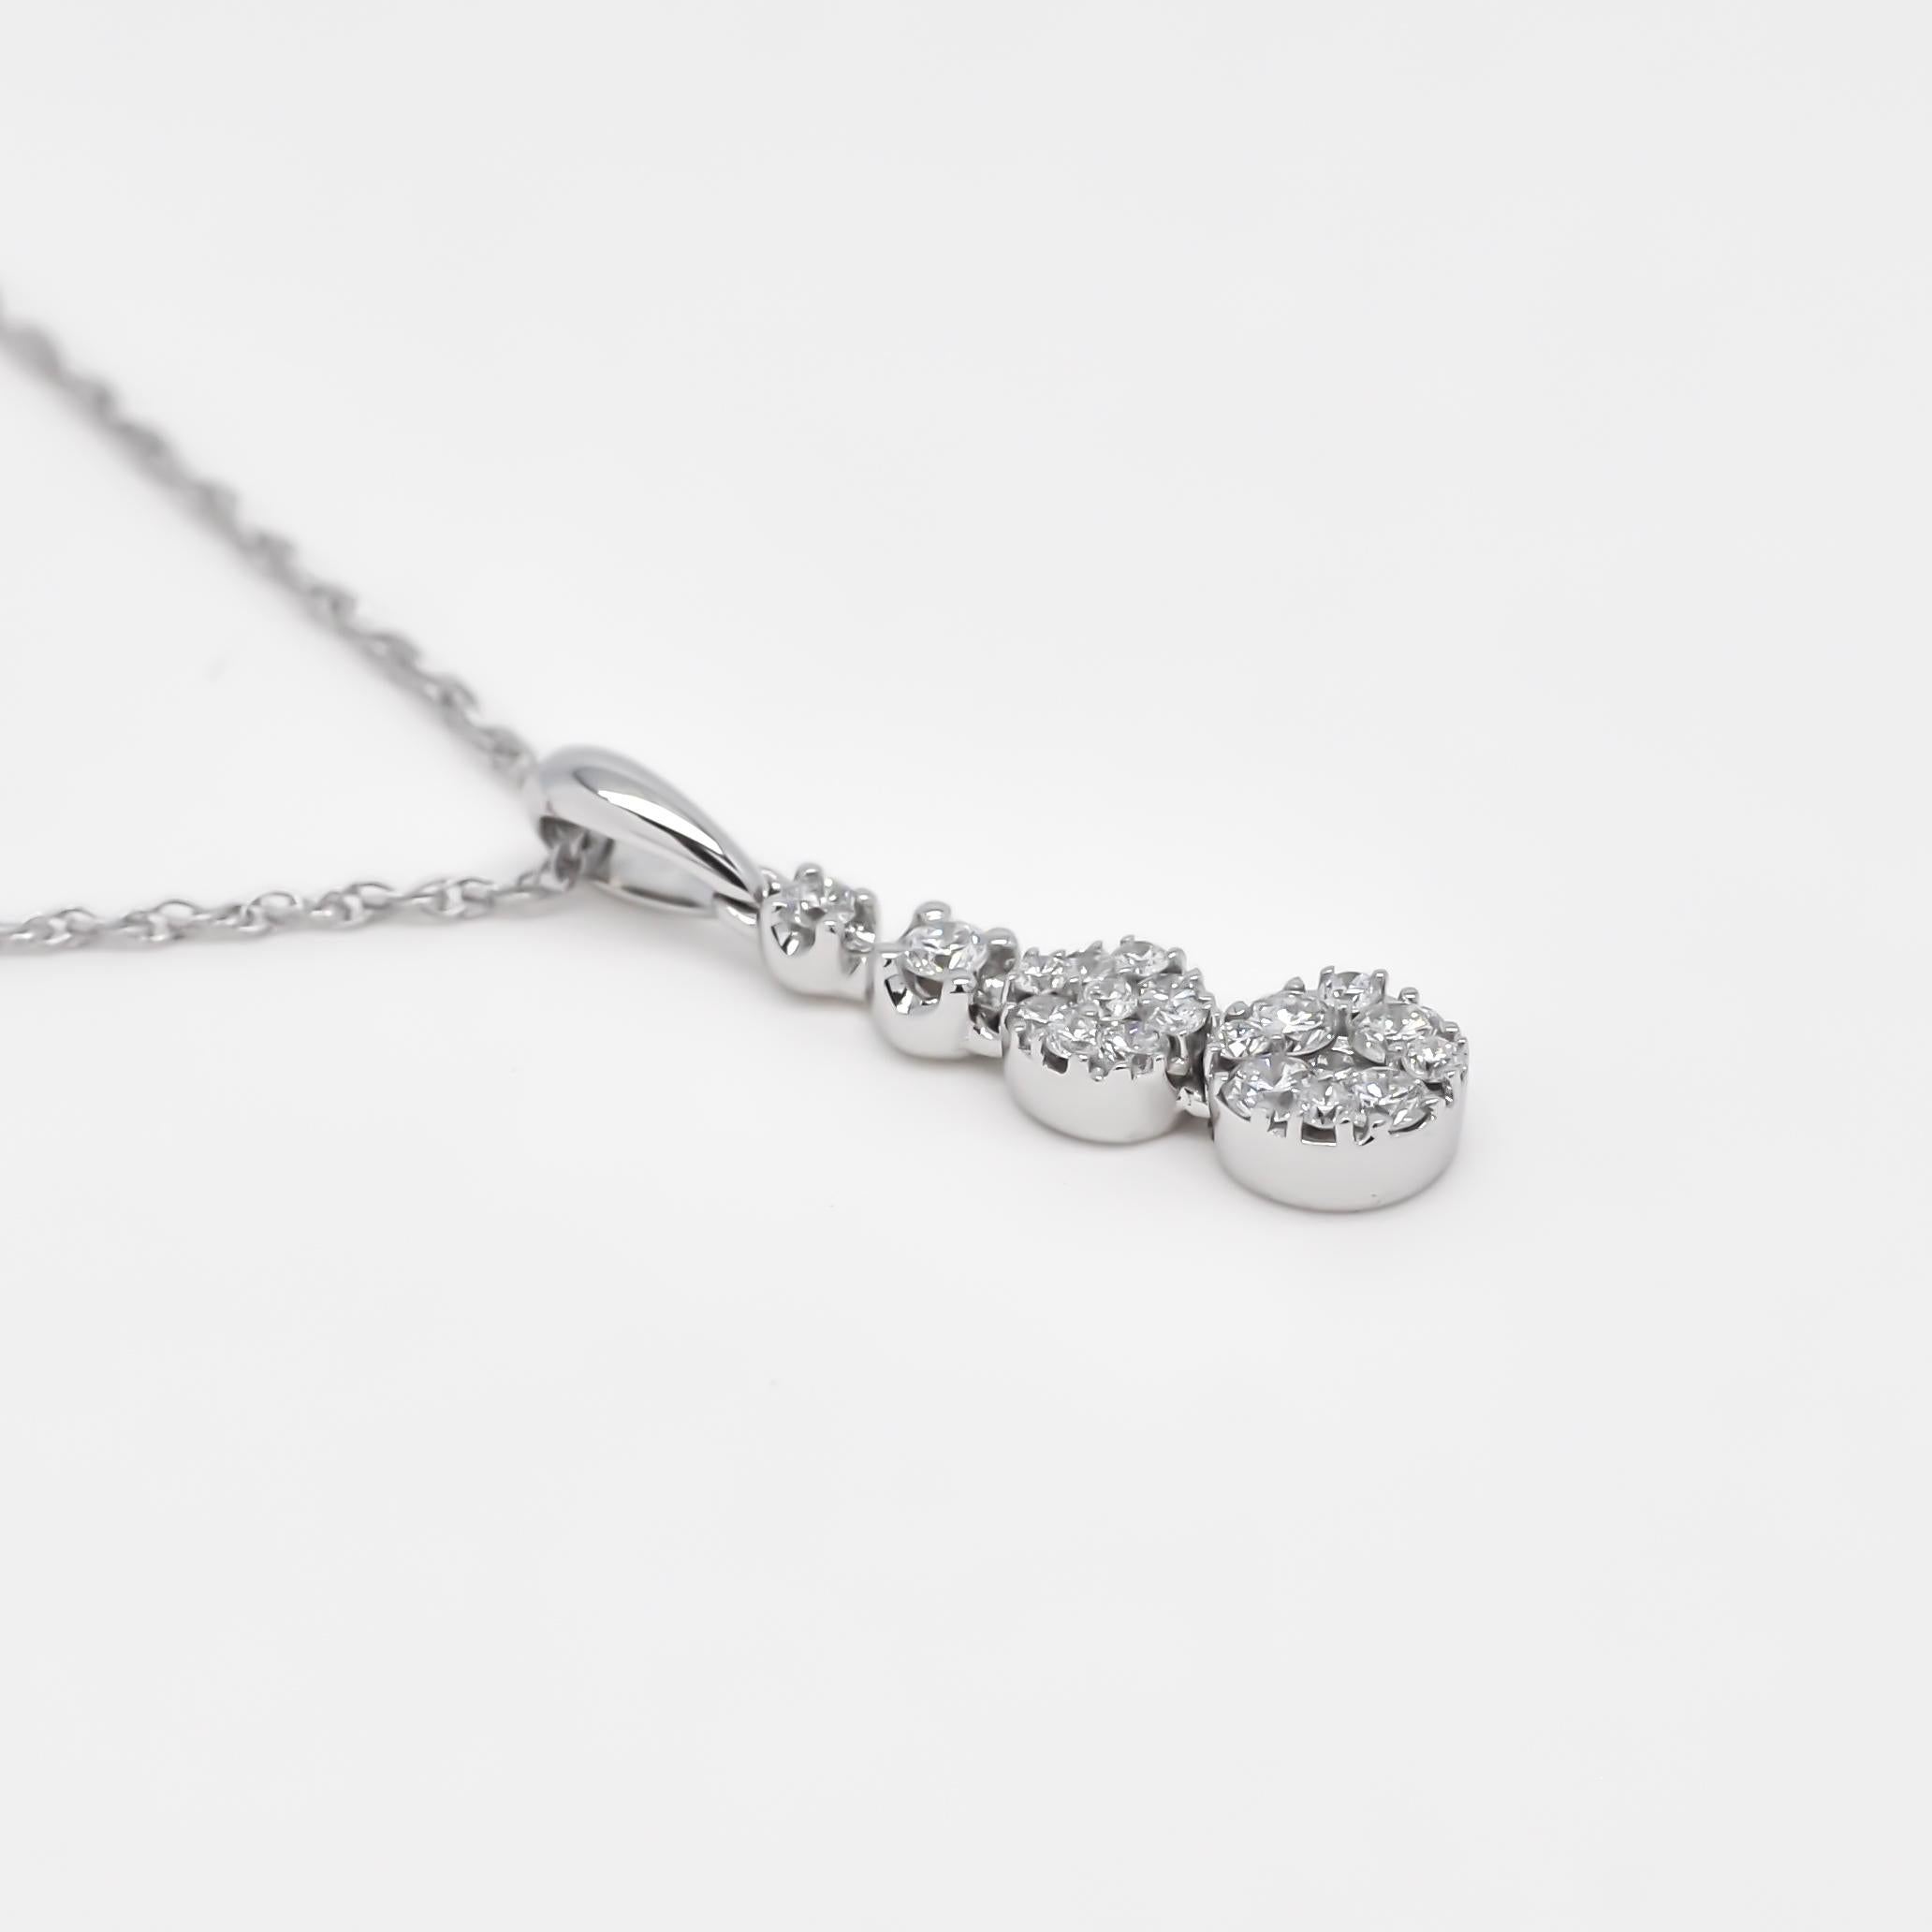 Enhance your wardrobe with the subtle yet captivating allure of this natural diamond pendant necklace. This exquisite piece boasts a total diamond weight of 0.27 carats, featuring four brilliant diamonds that are artfully clustered together. 

The